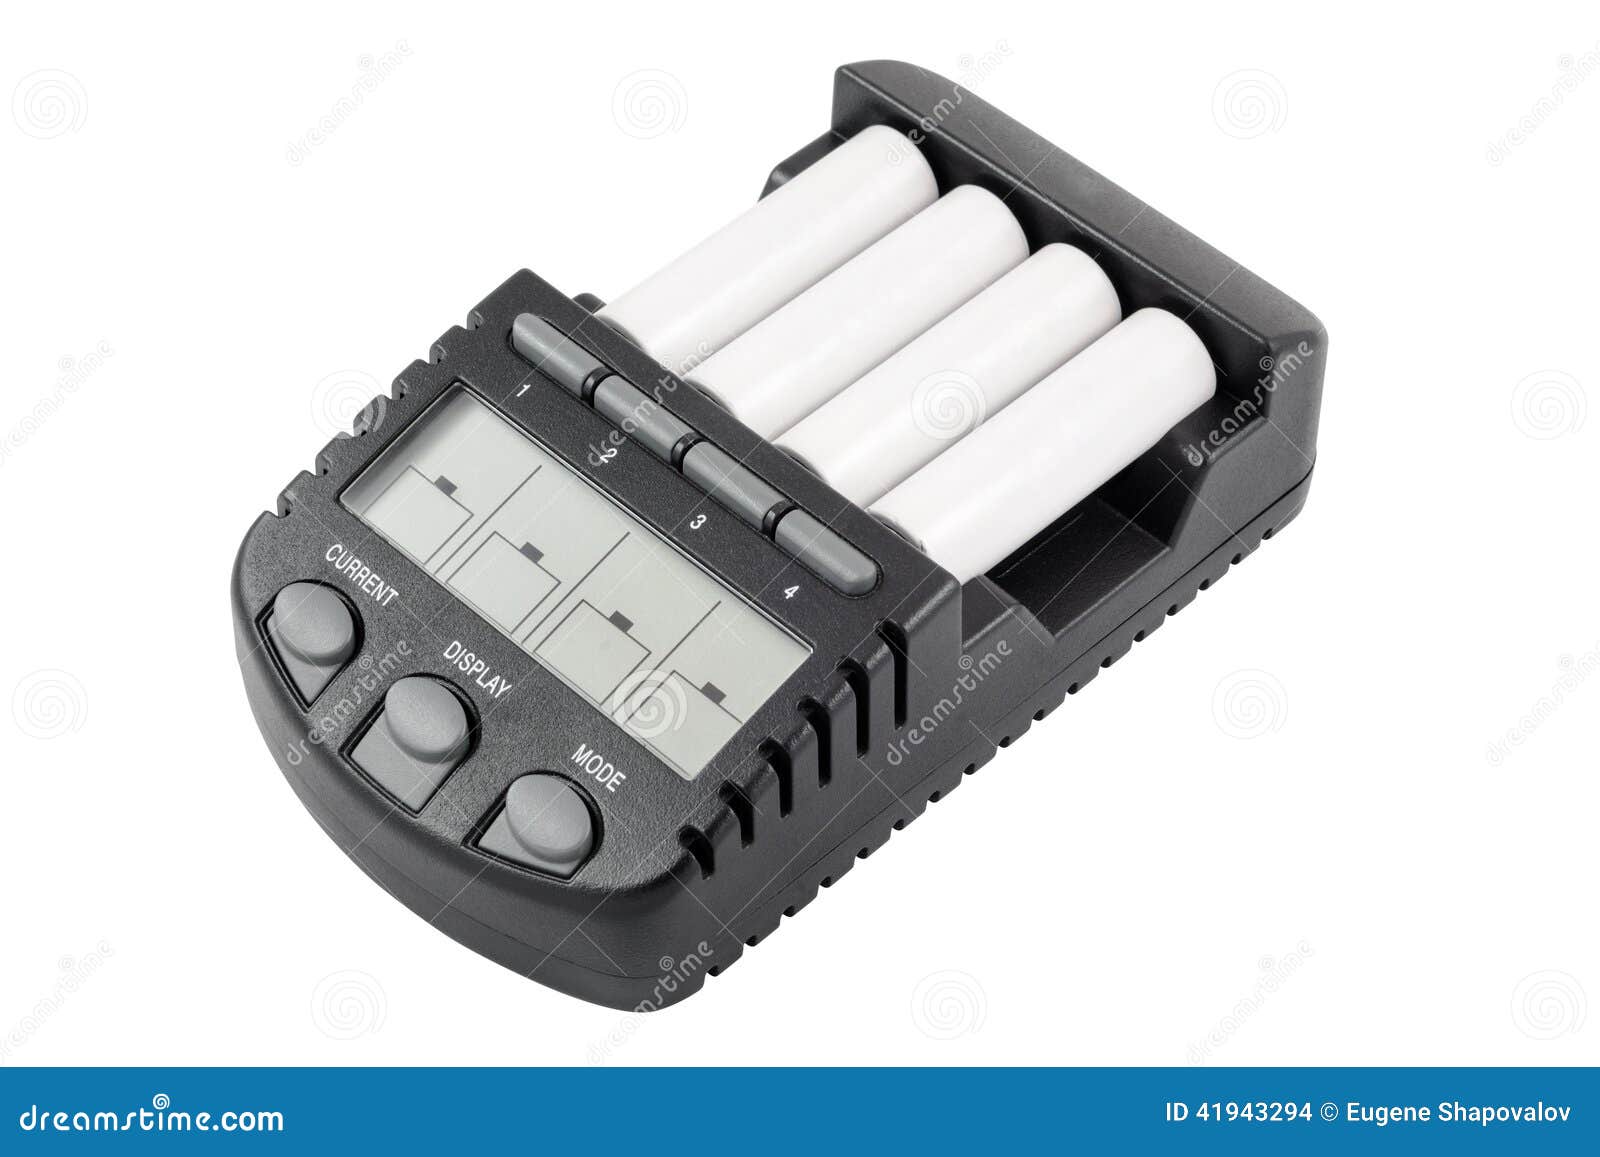 intelligent accumulator battery charger with aa